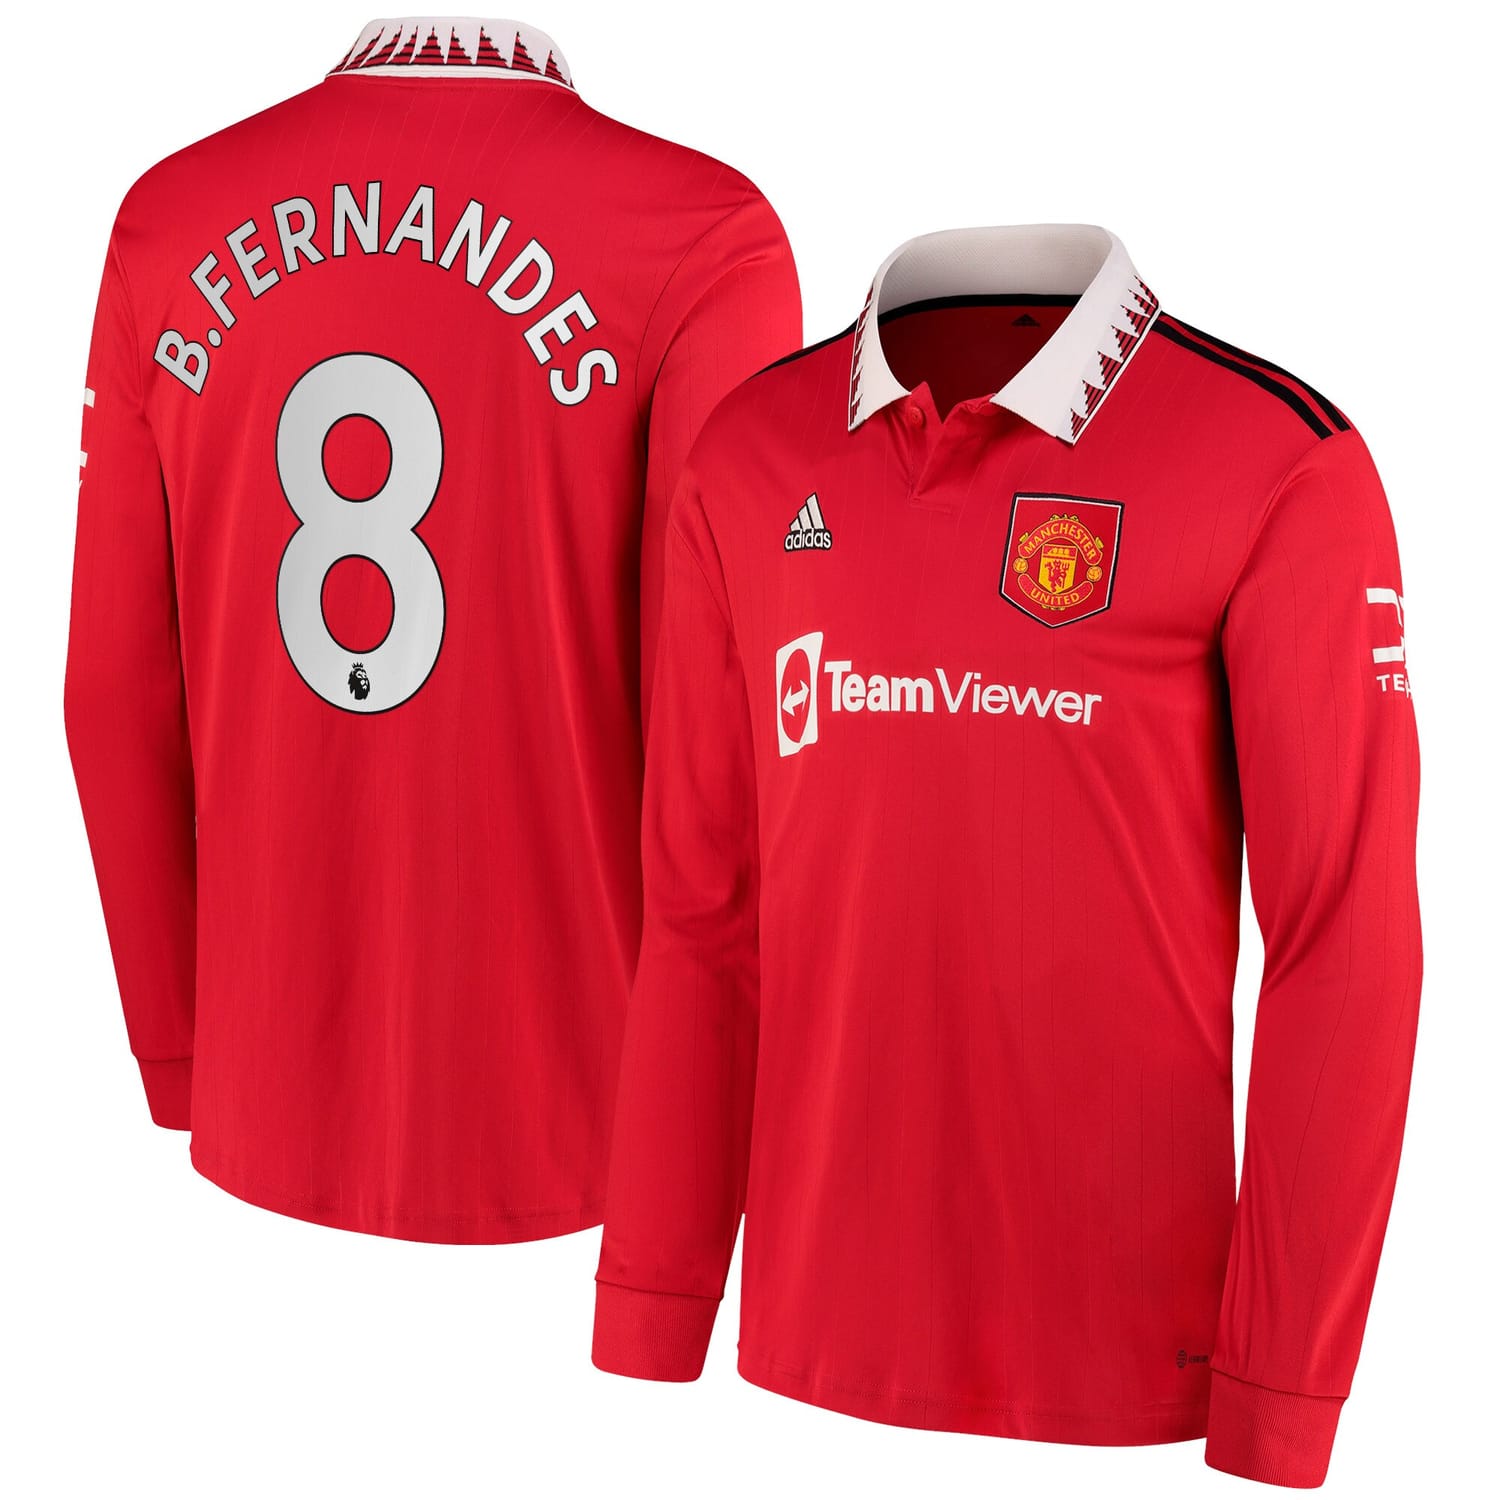 Premier League Manchester United Home Jersey Shirt Long Sleeve Red 2022-23 player Bruno Fernandes printing for Men